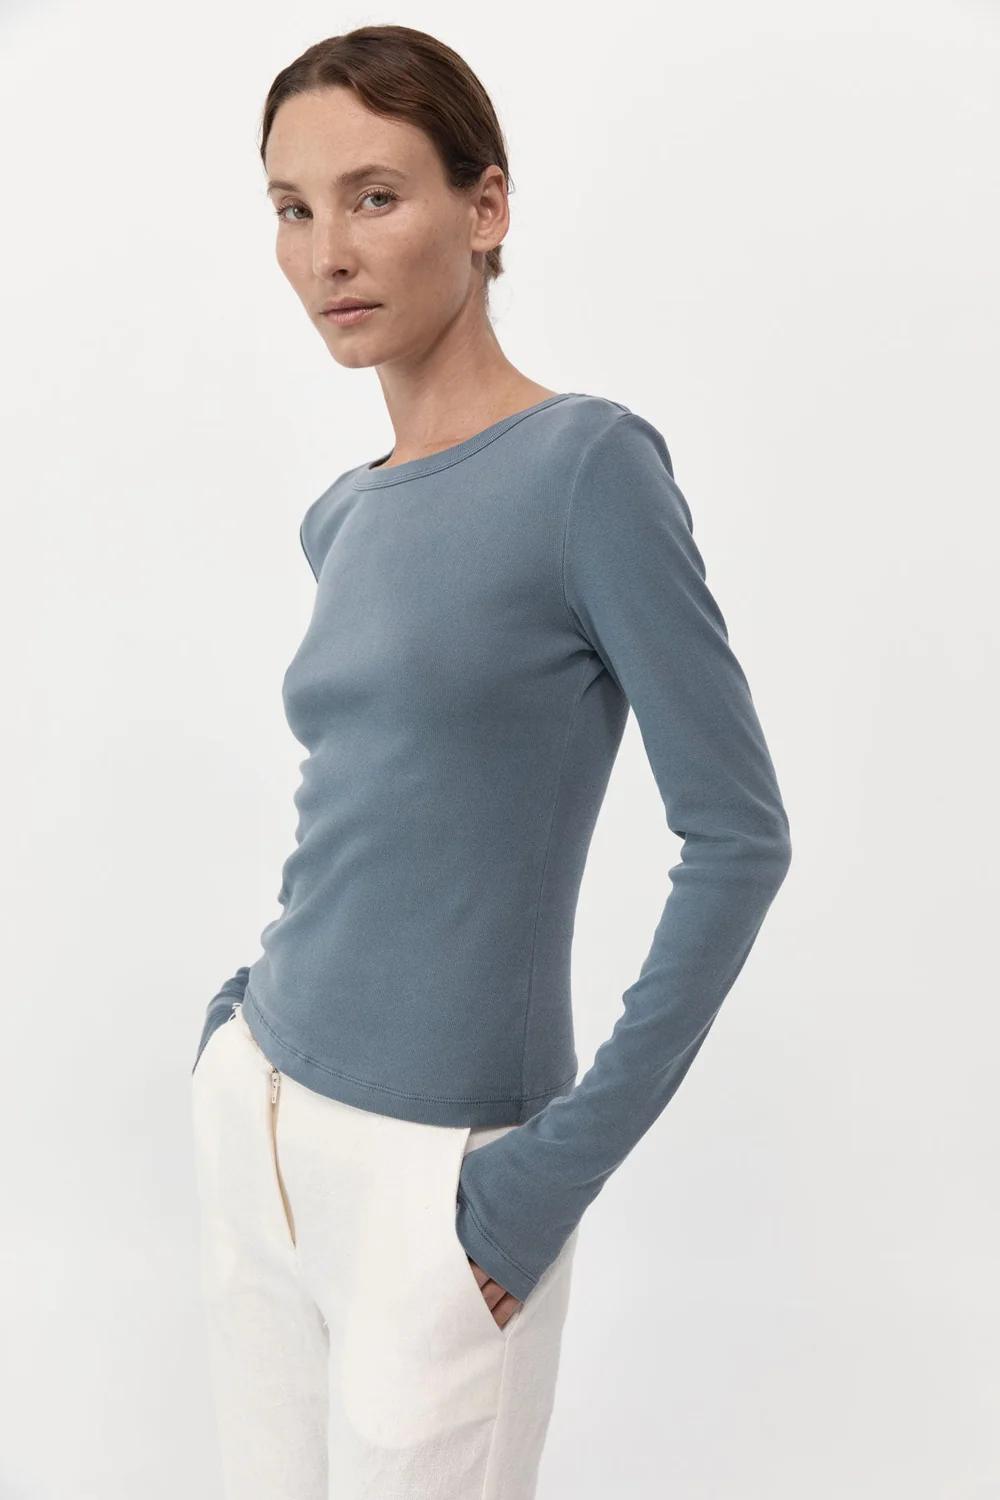 Product Image for Organic Cotton Long Sleeve Top, Diesel Grey